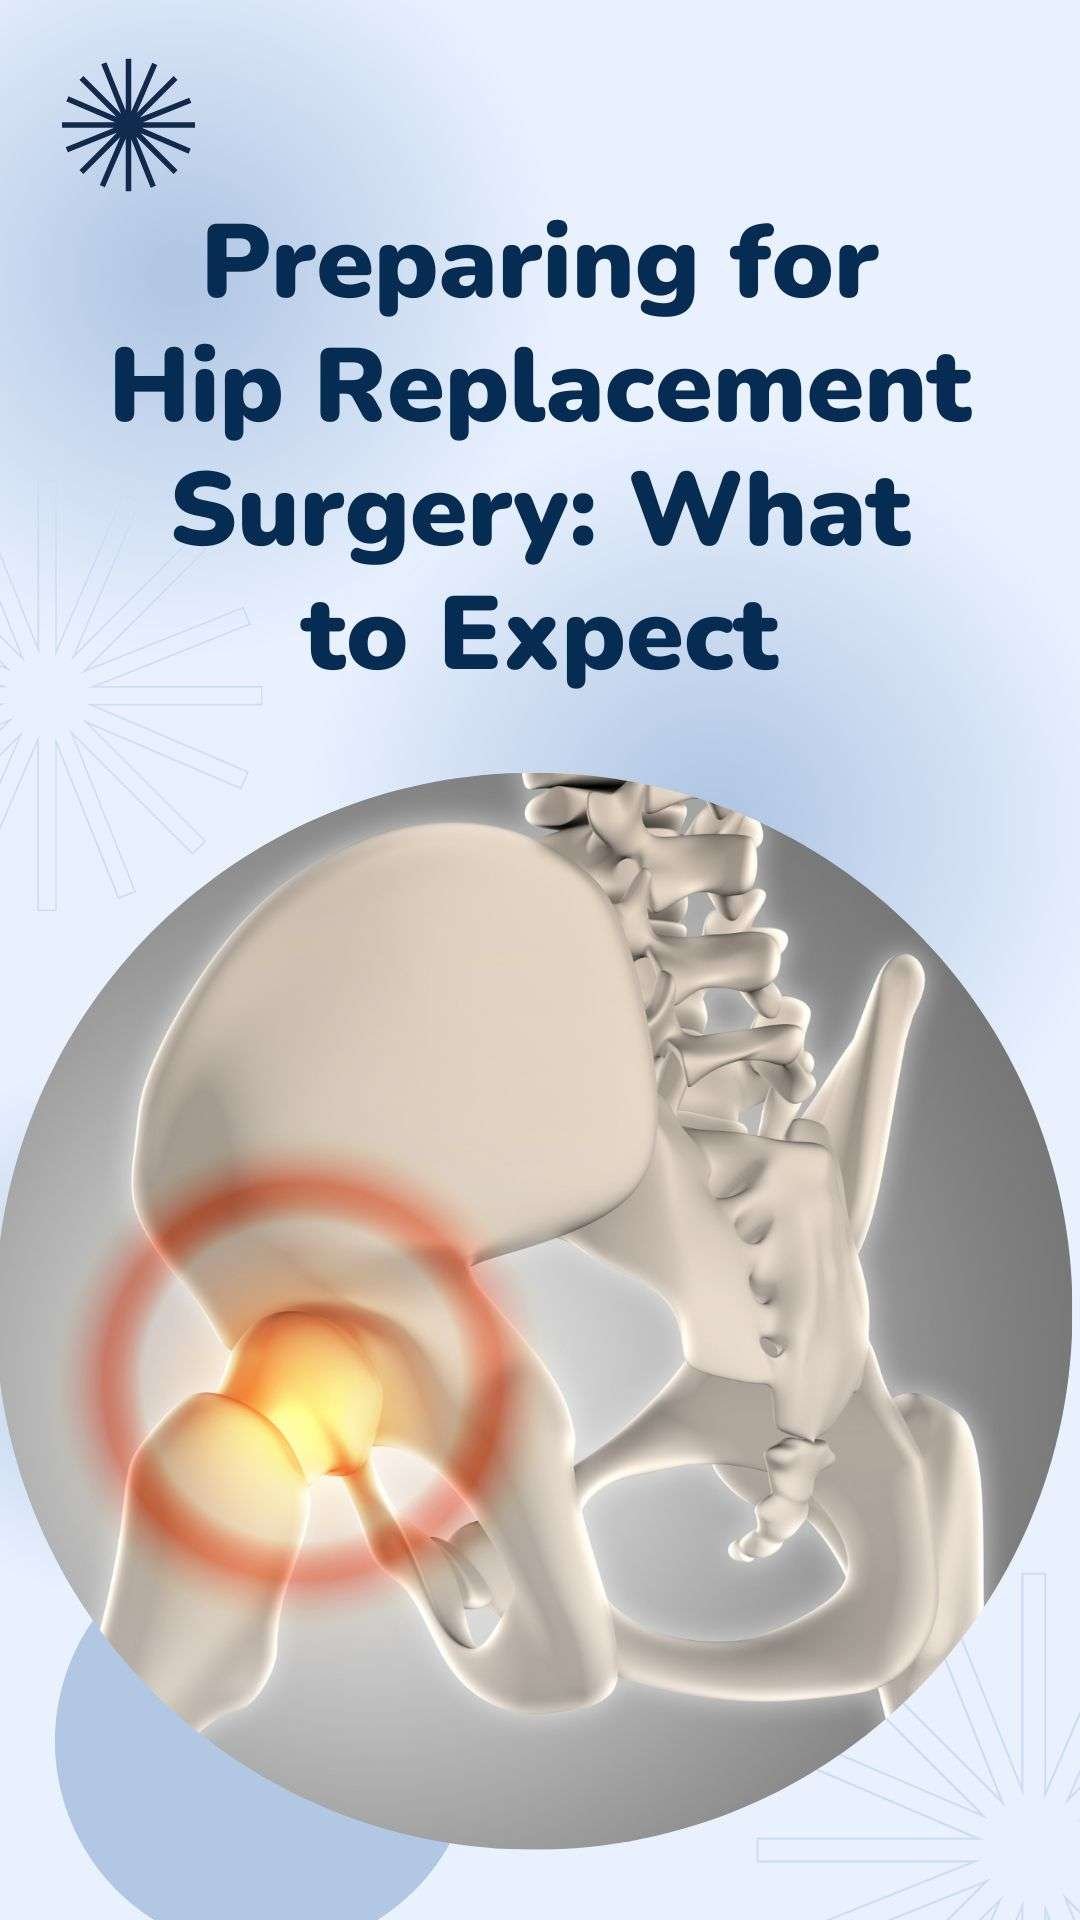 Preparing for Hip Replacement Surgery: What to Expect